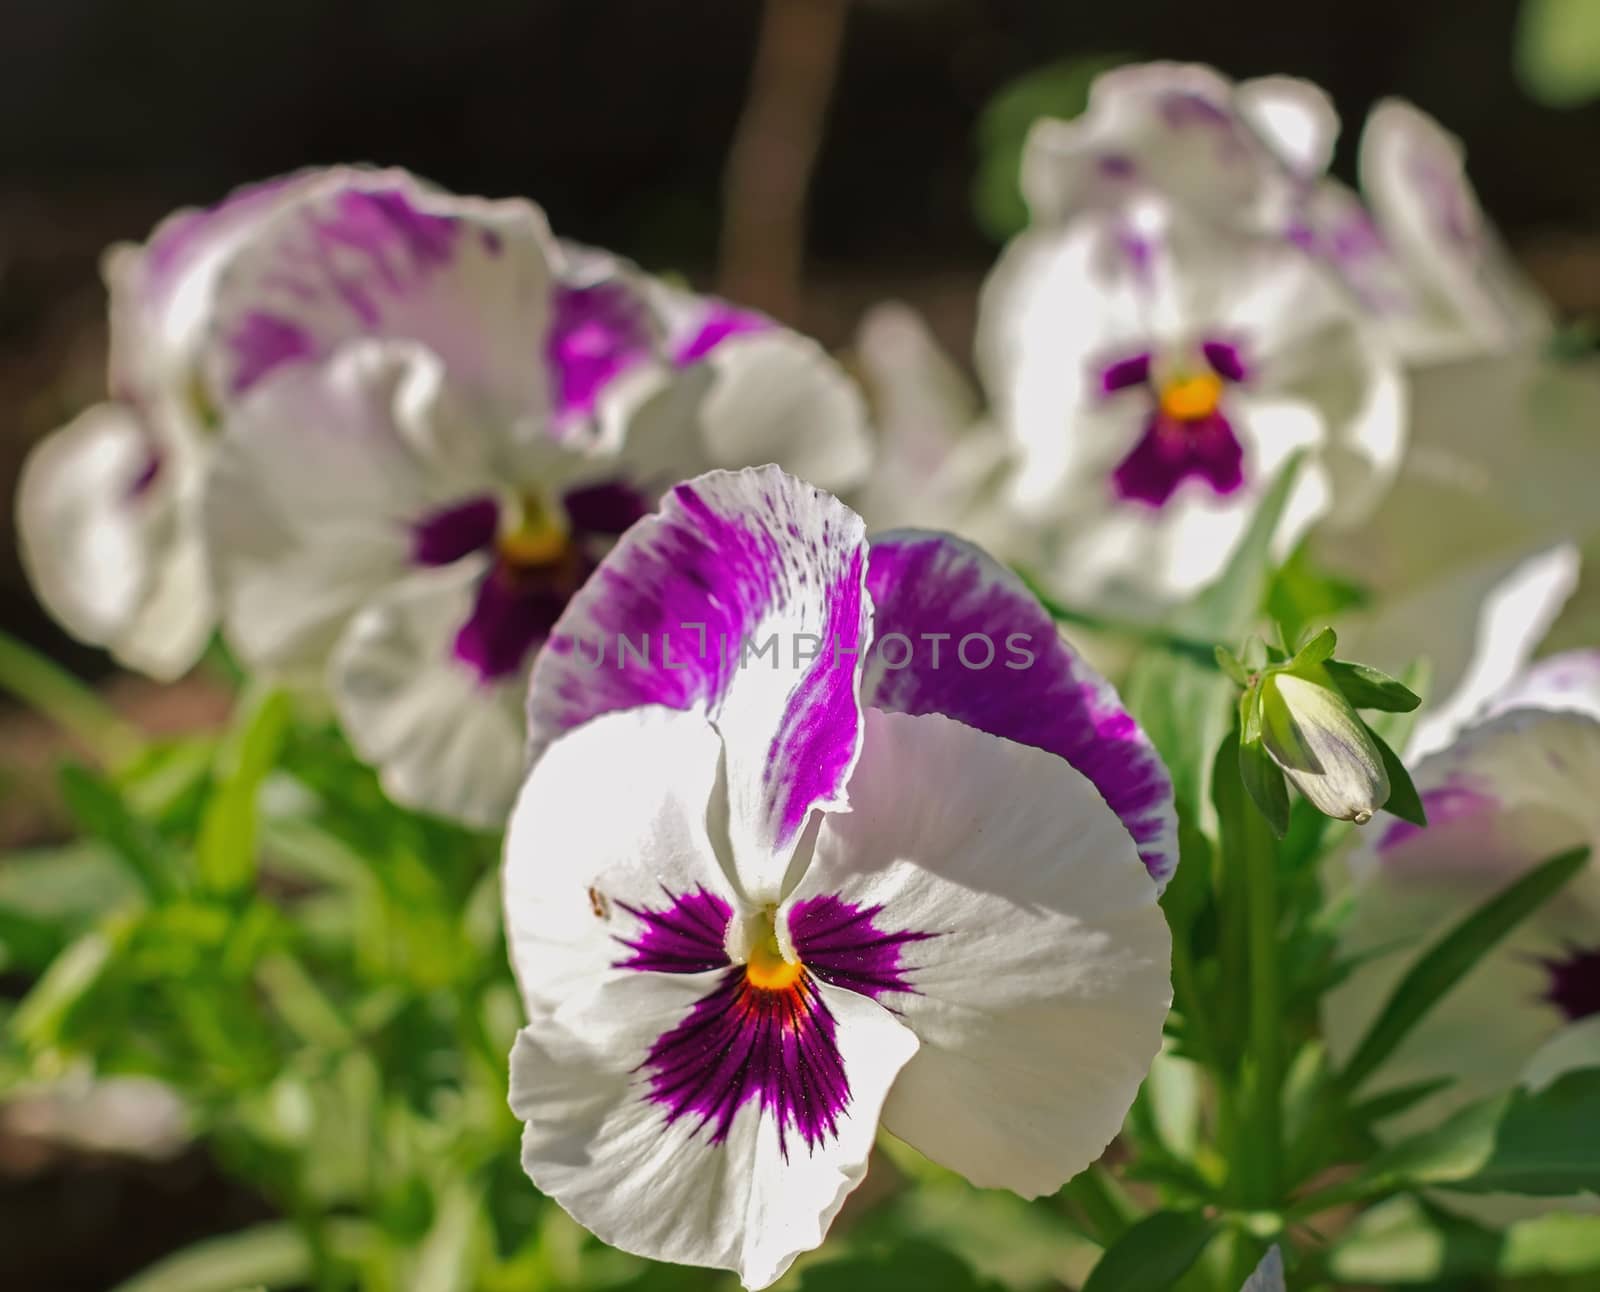 pansy flowers in a garden ornamental plants, soft focus